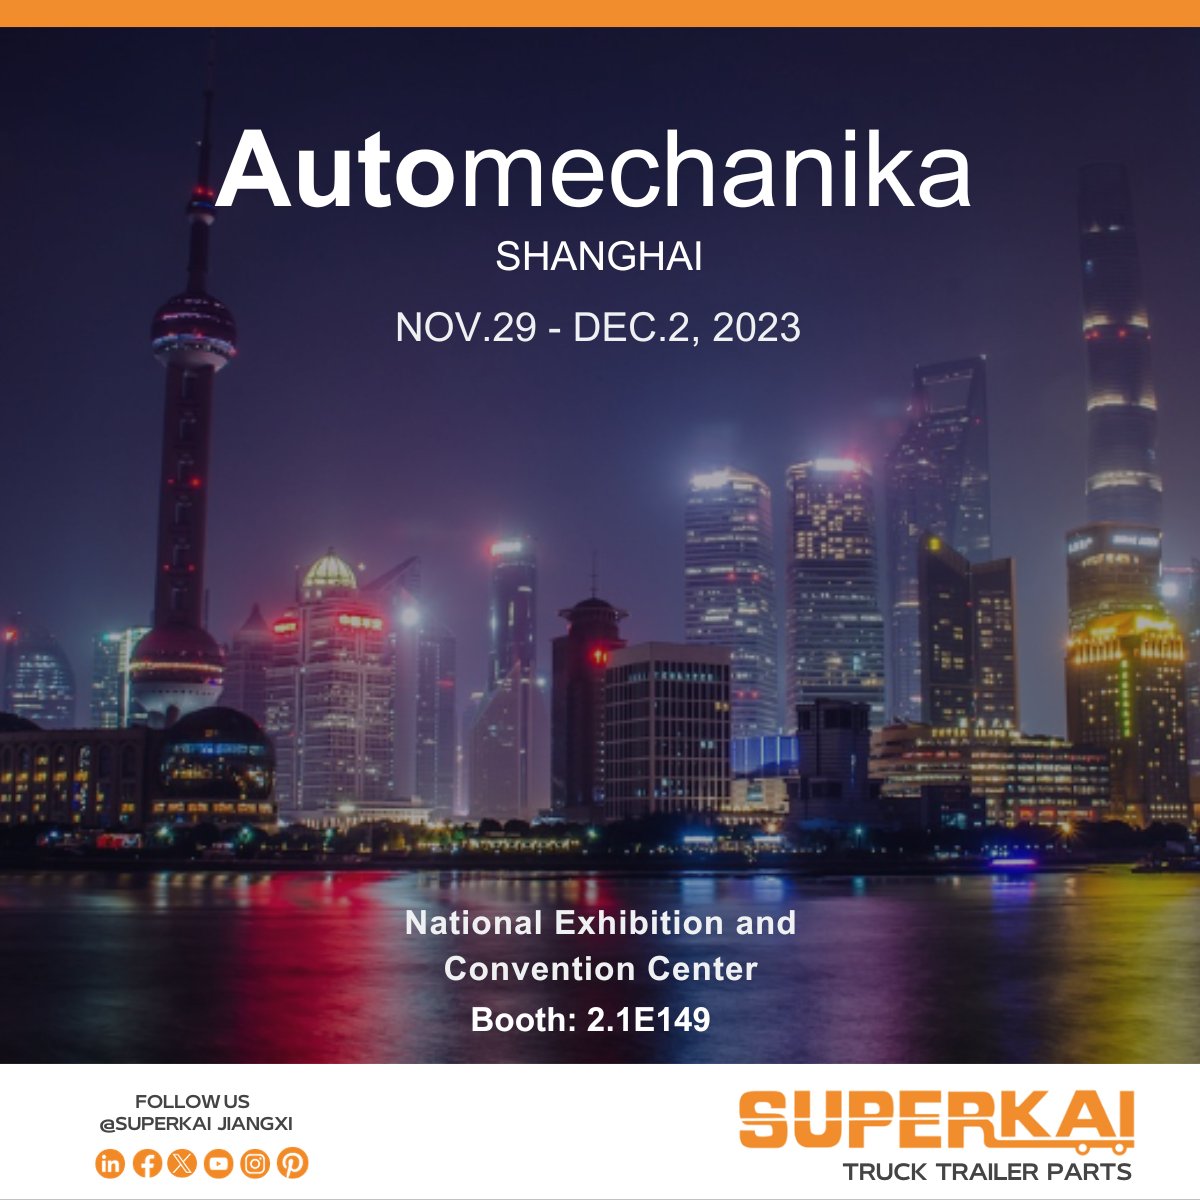 We will waiting for you at Automechanika Shanghai Nov.29-Dec.2,2023.
You will meet us at Booth: 2.1E149

#AMS #automechanikash #automechanikashanghai #automechanika #automotive #OEM #aftermarket #supplychain #automechanika2023 #cvpart #truck #trailer #heavyduty